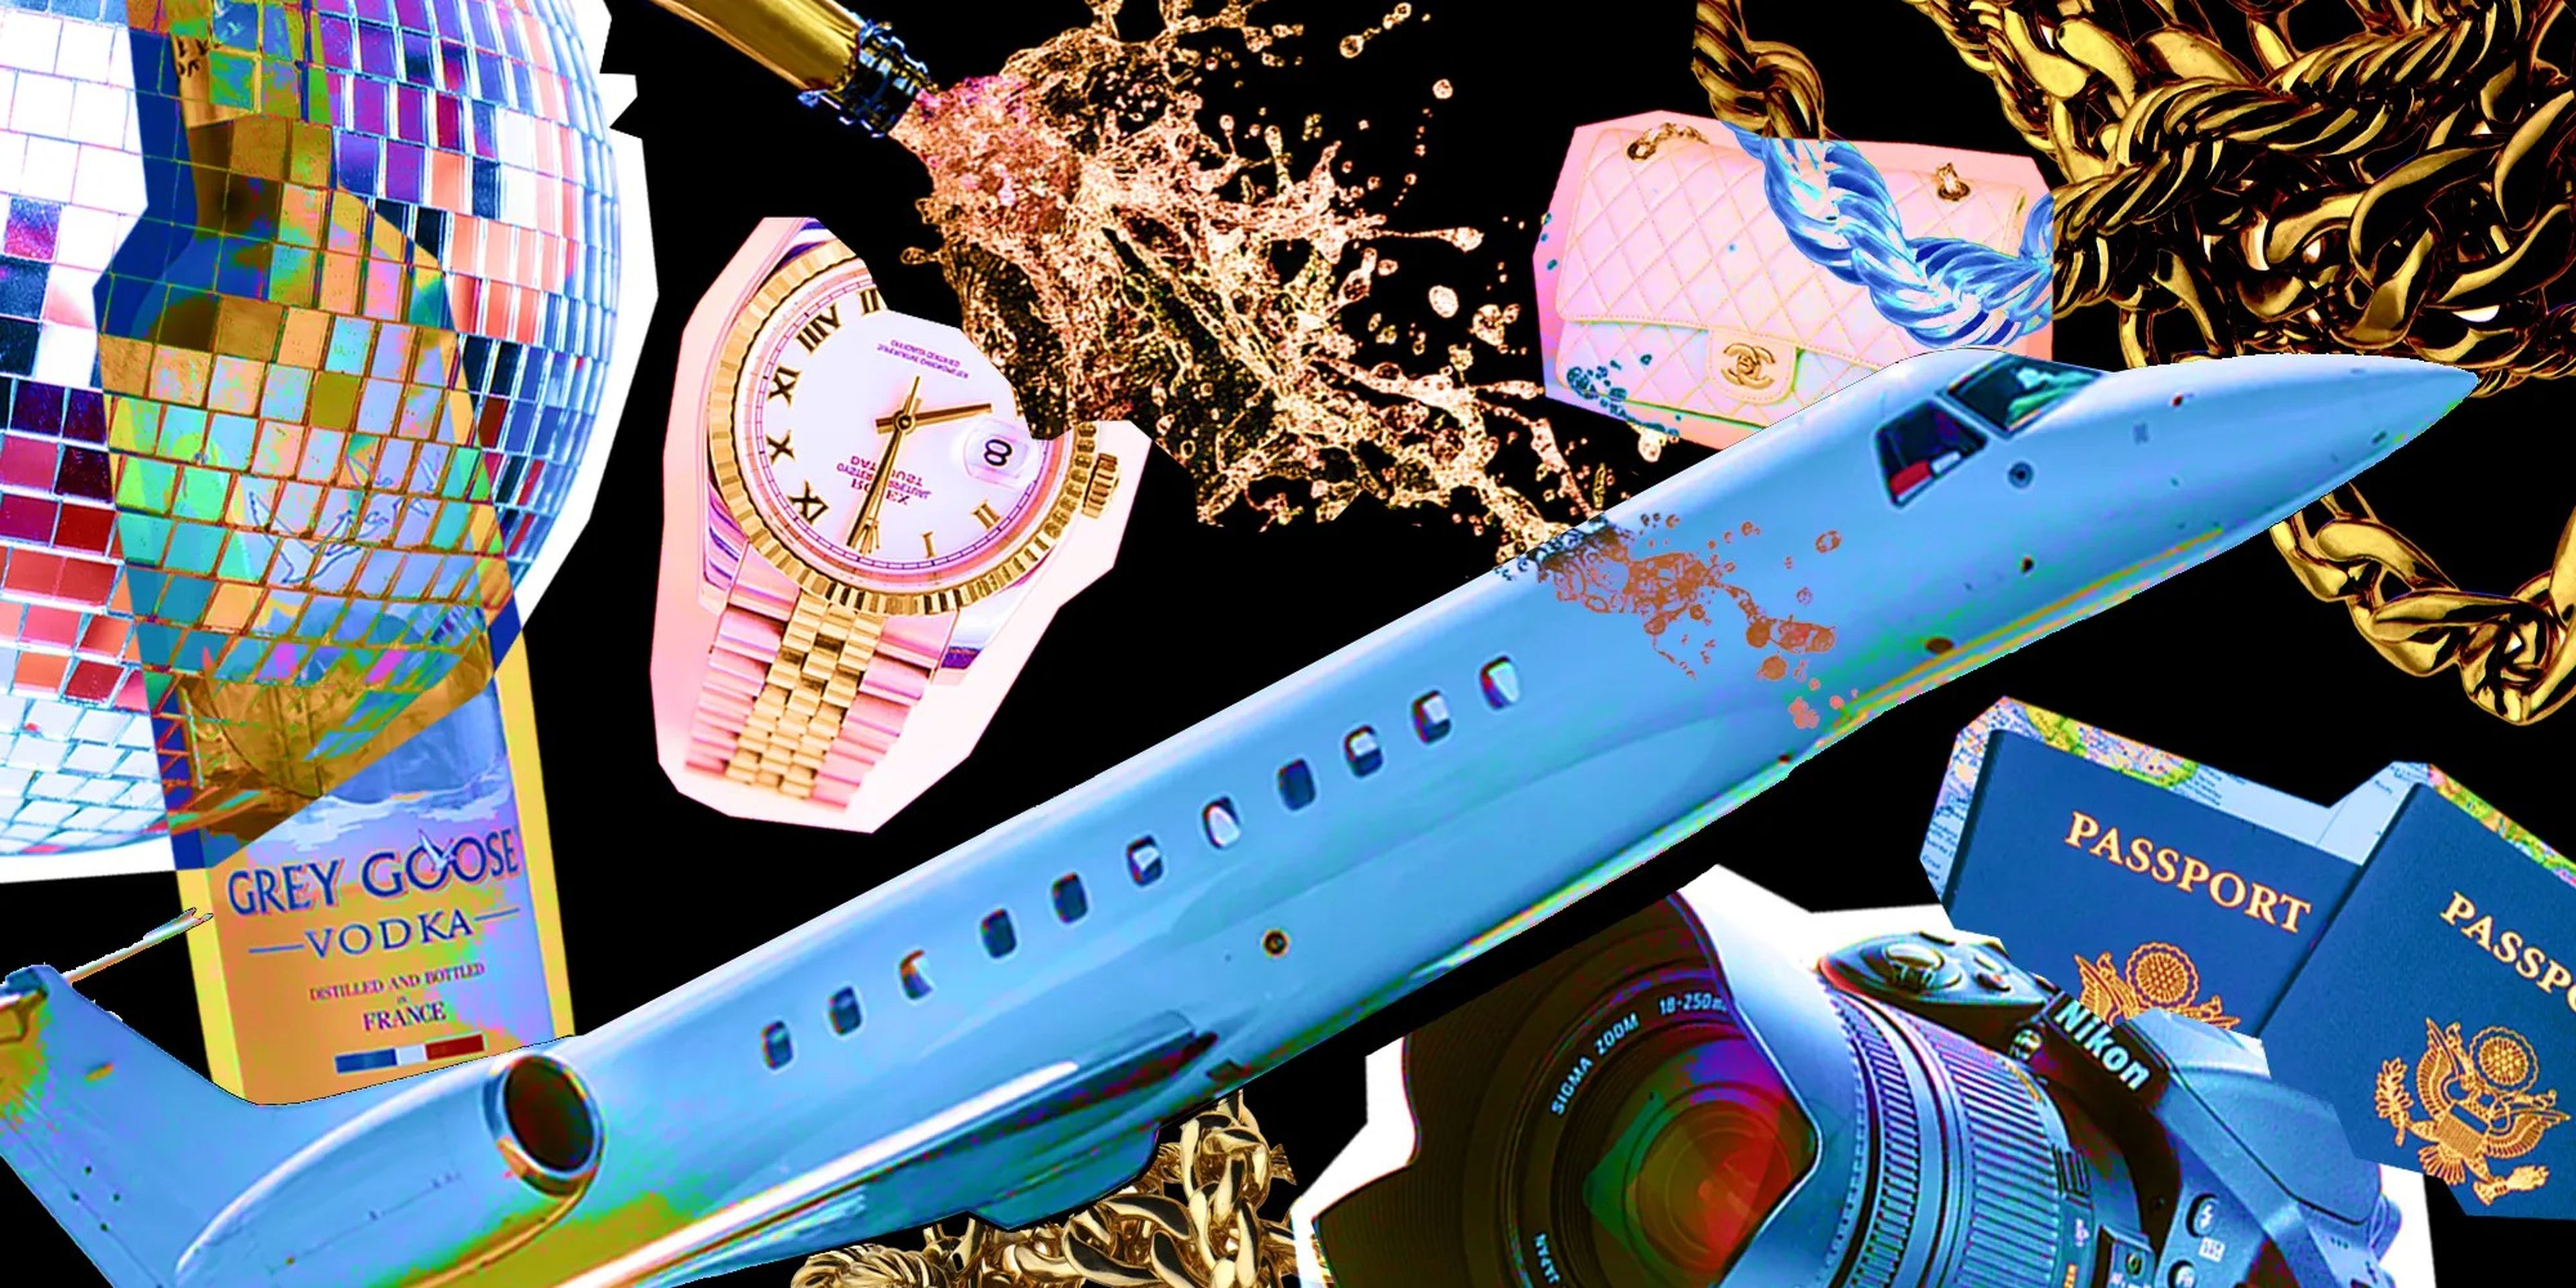 A plane, chanel purse, Rolex, gold chain, and other luxury items are displayed together